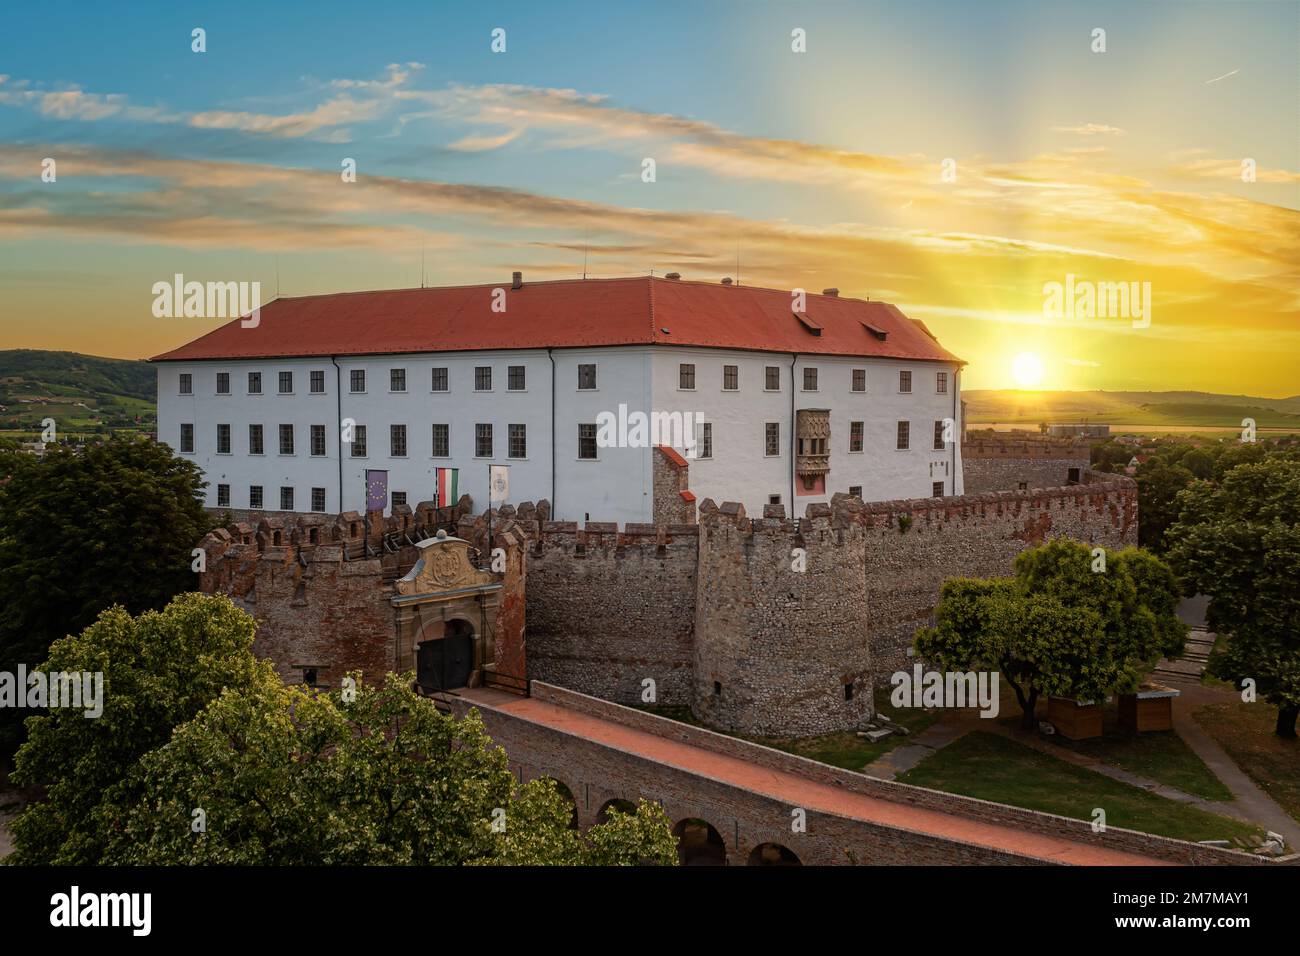 Castle of Siklos in Souht Hungary. A mazing historical fortress and touristical attraction in Baranya county. Built in 12th century. Stock Photo